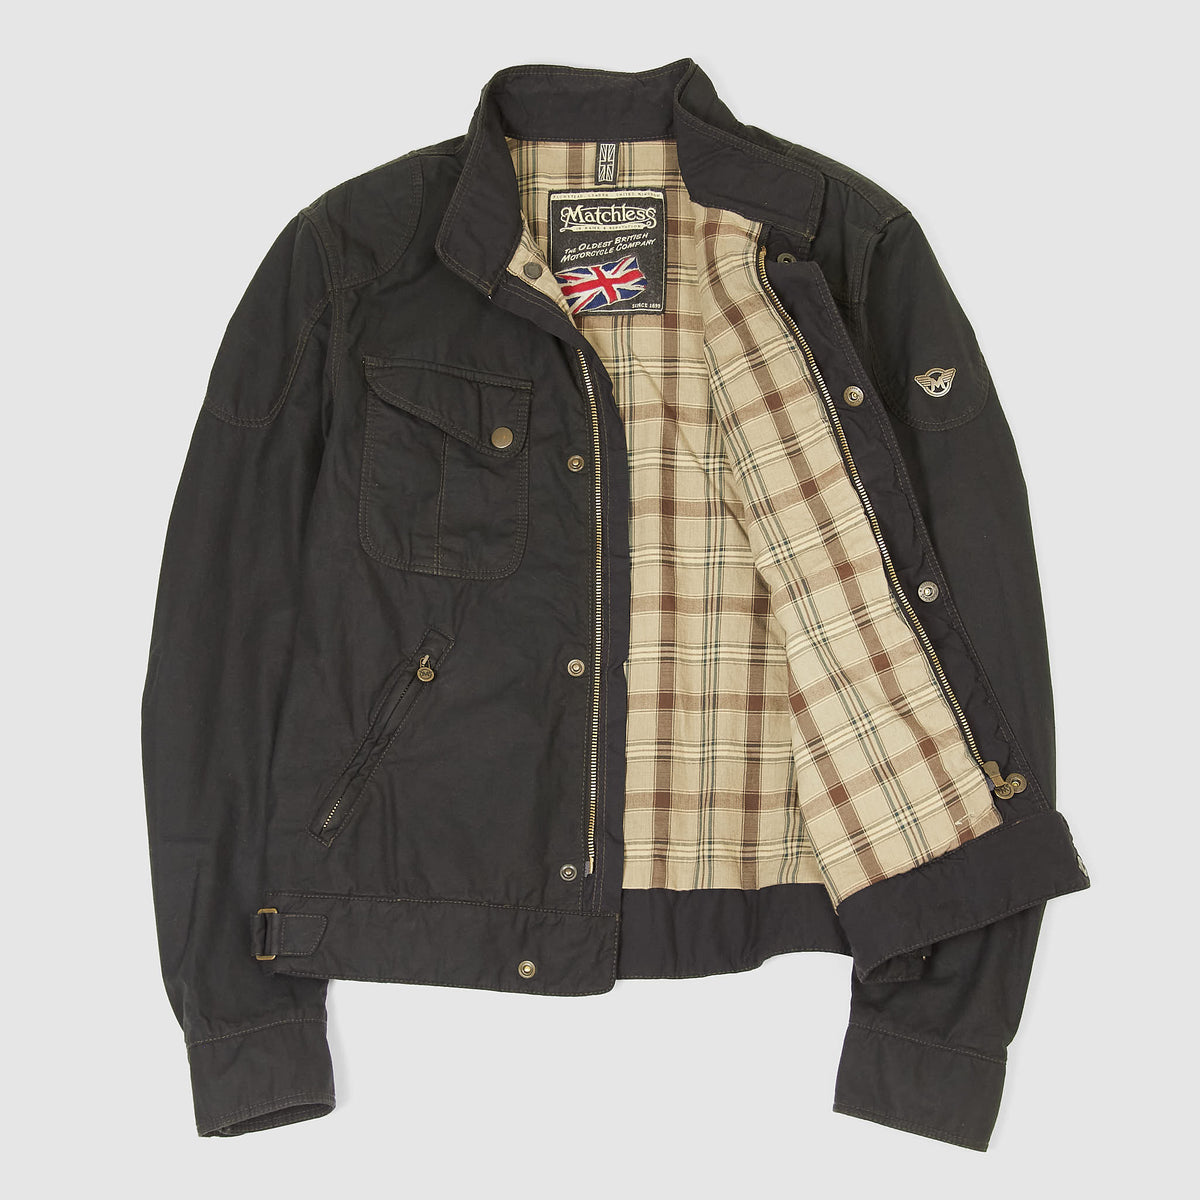 Matchless Road Driver Wax-Jacket